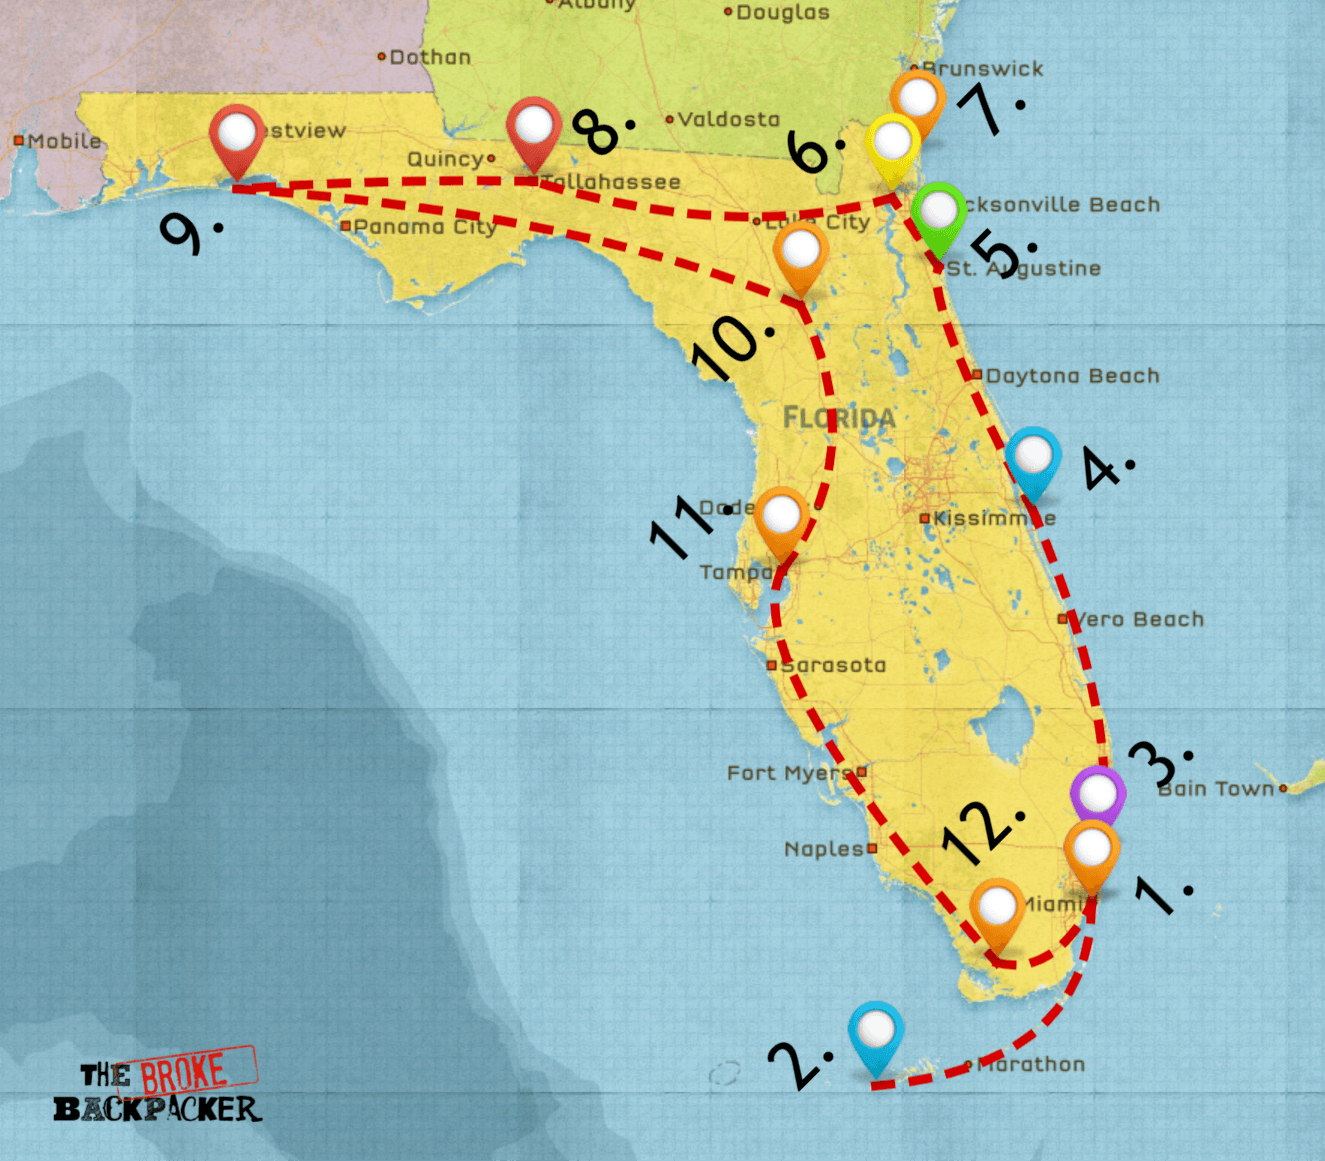 Epic Florida Road Trip Guide For March 2019 - Itineraries, Tips - Florida Road Trip Map